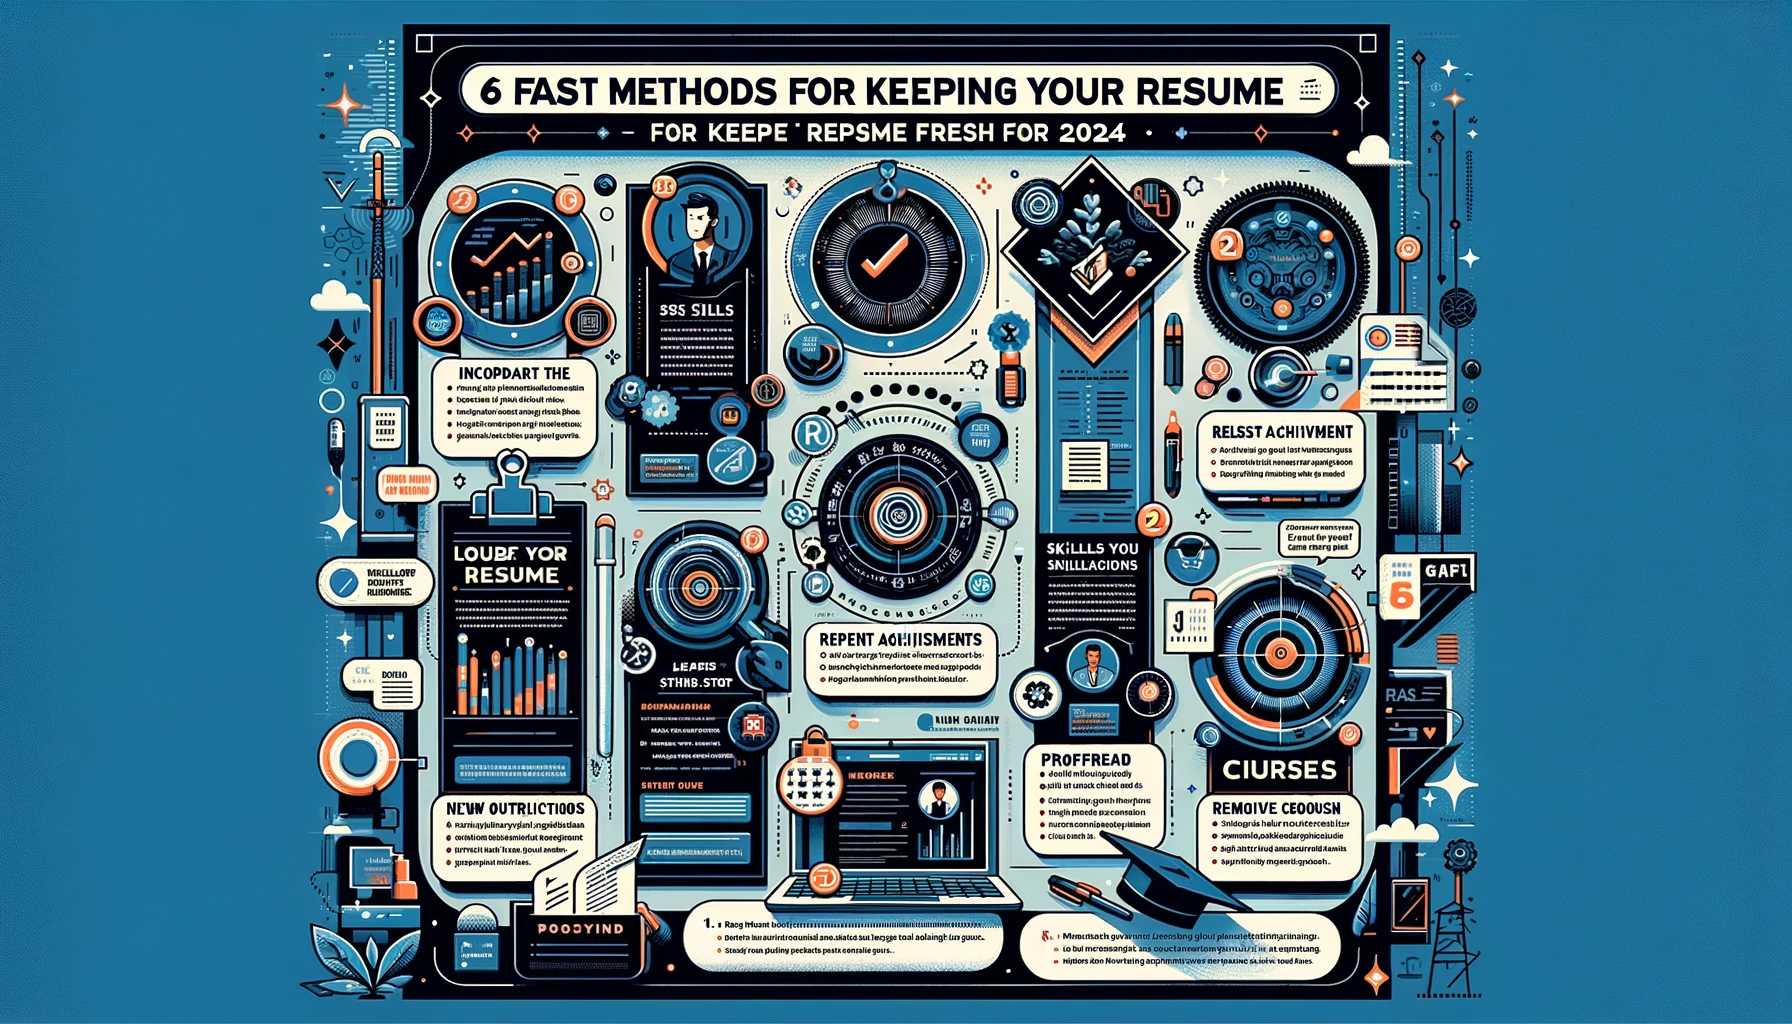 6 Fast Methods for keeping Your Resume New For 2024